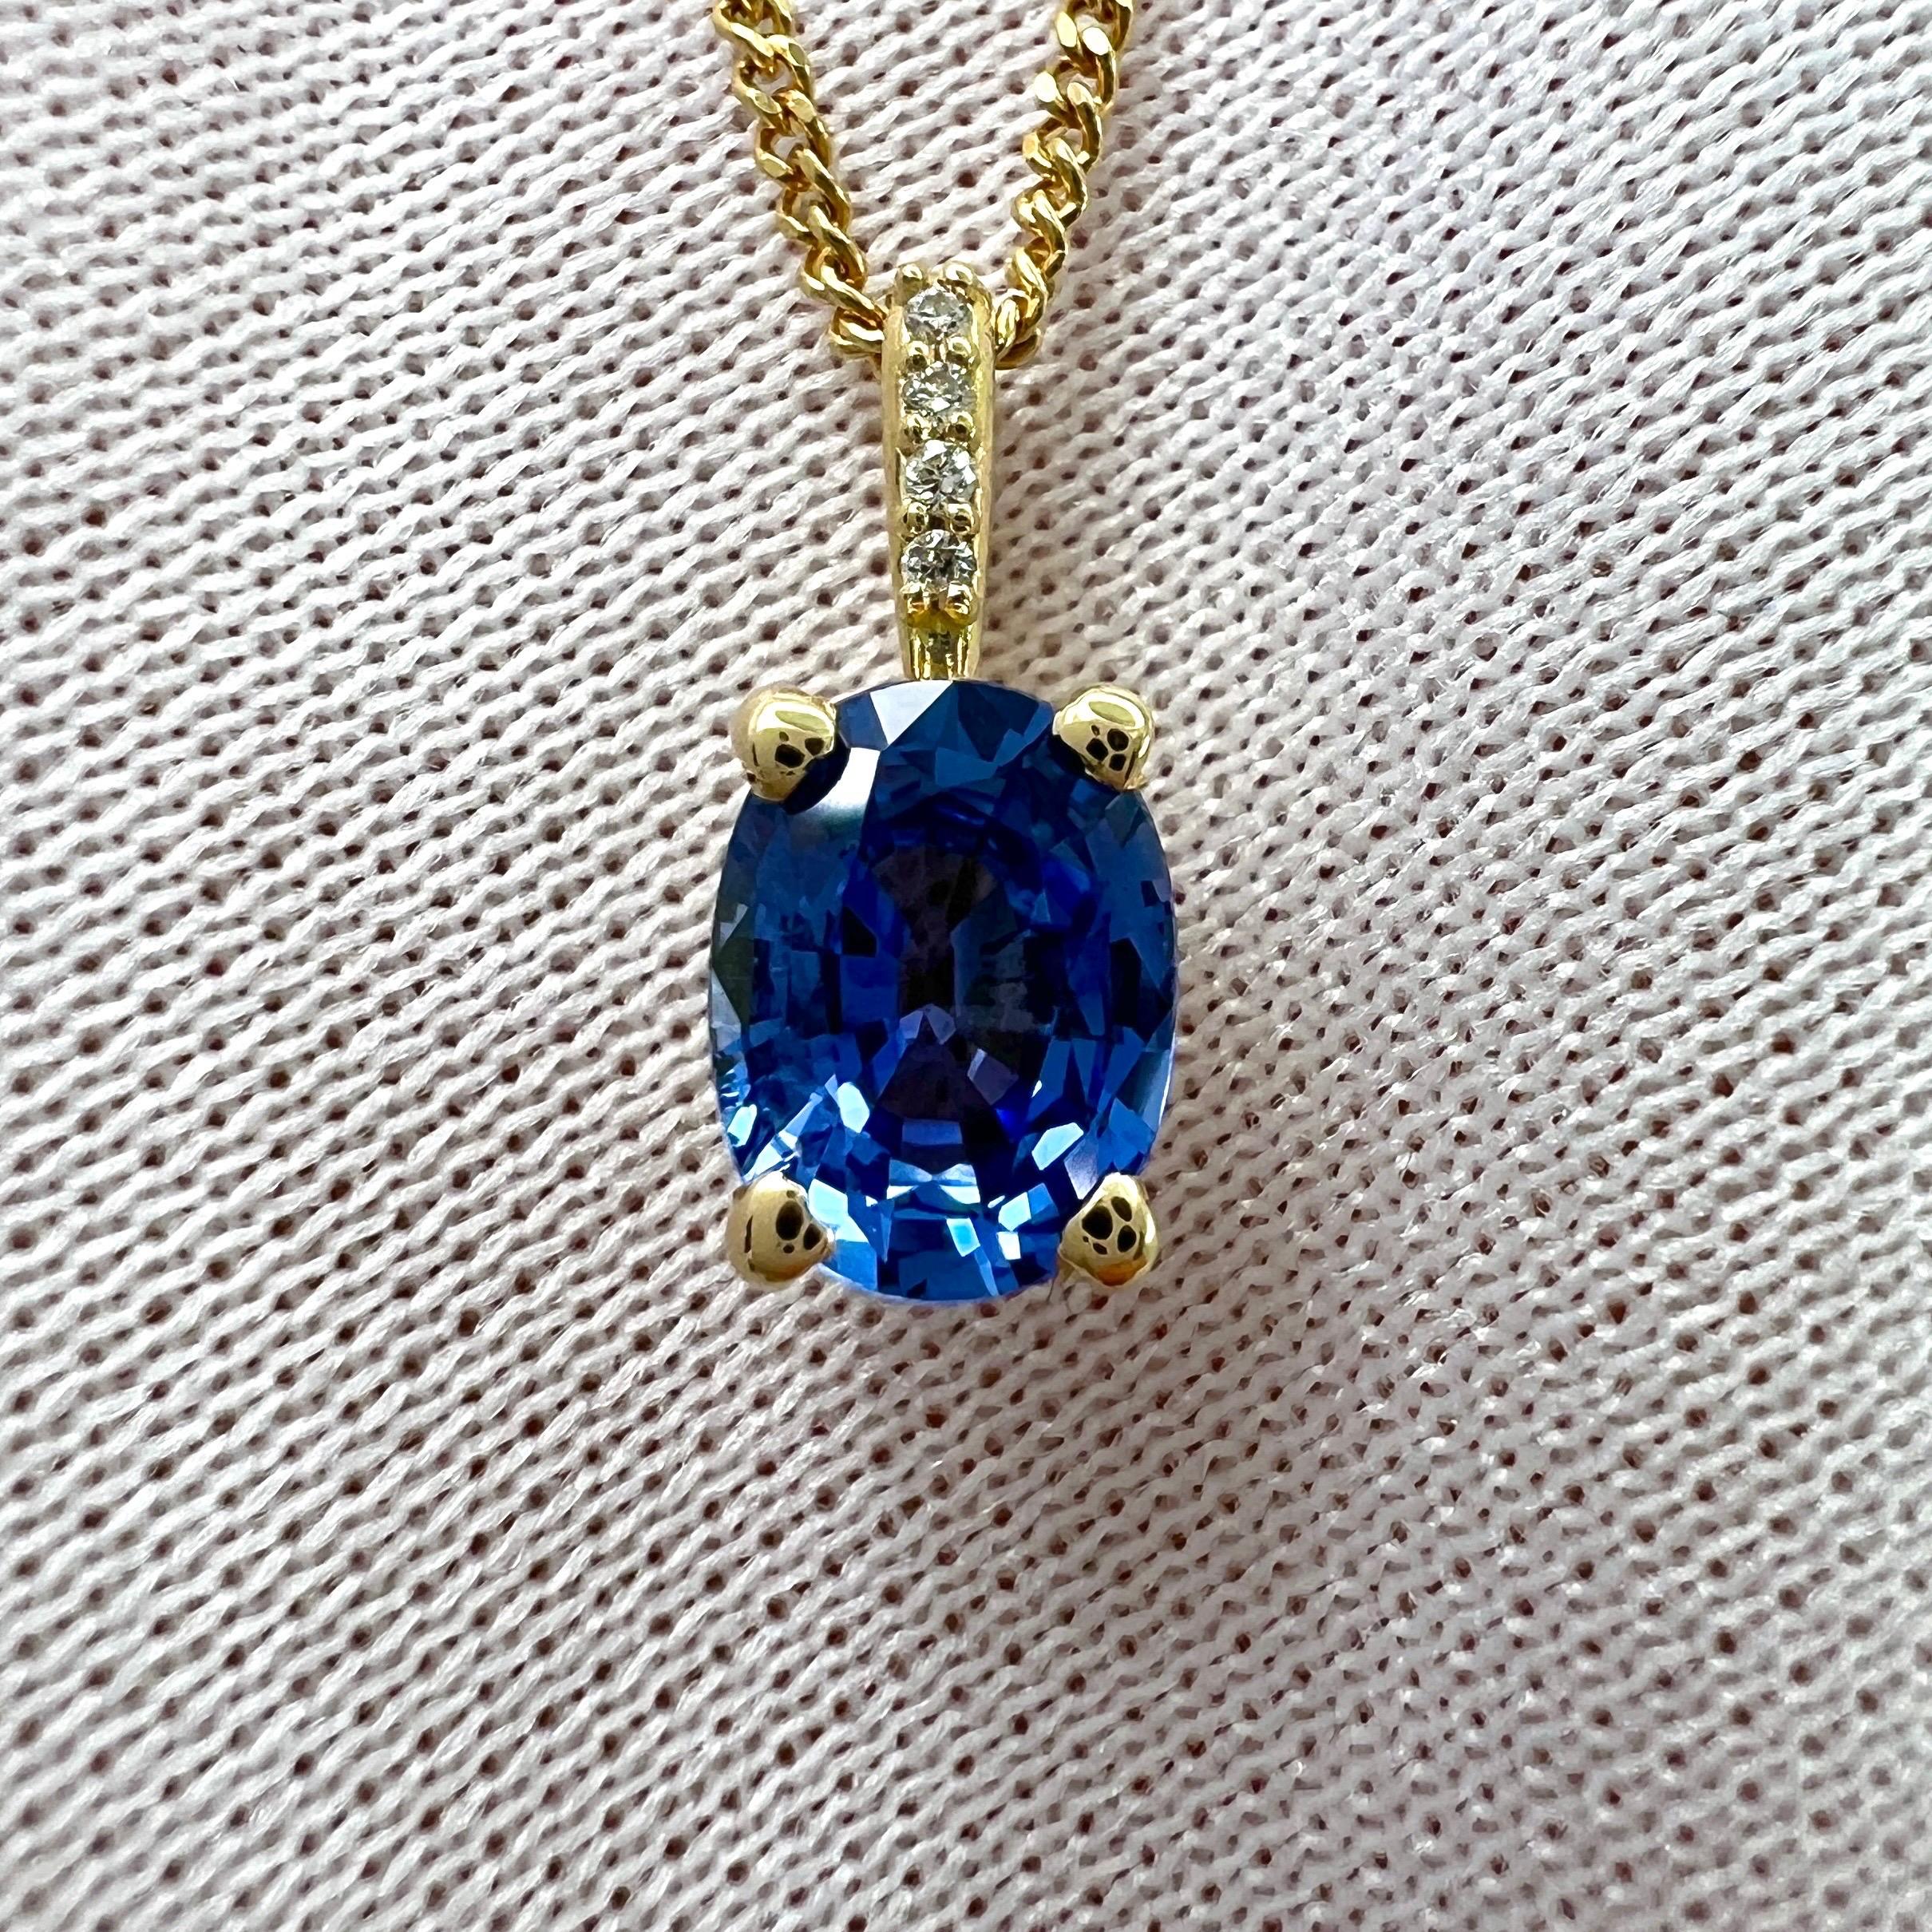 Fine Cornflower Blue Ceylon Sapphire & Diamond 18k Yellow Gold Pendant.

1.00 Carat sapphire with a fine vivid cornflower blue colour and very good clarity. A very clean stone with only some very small natural inclusions visible when looking